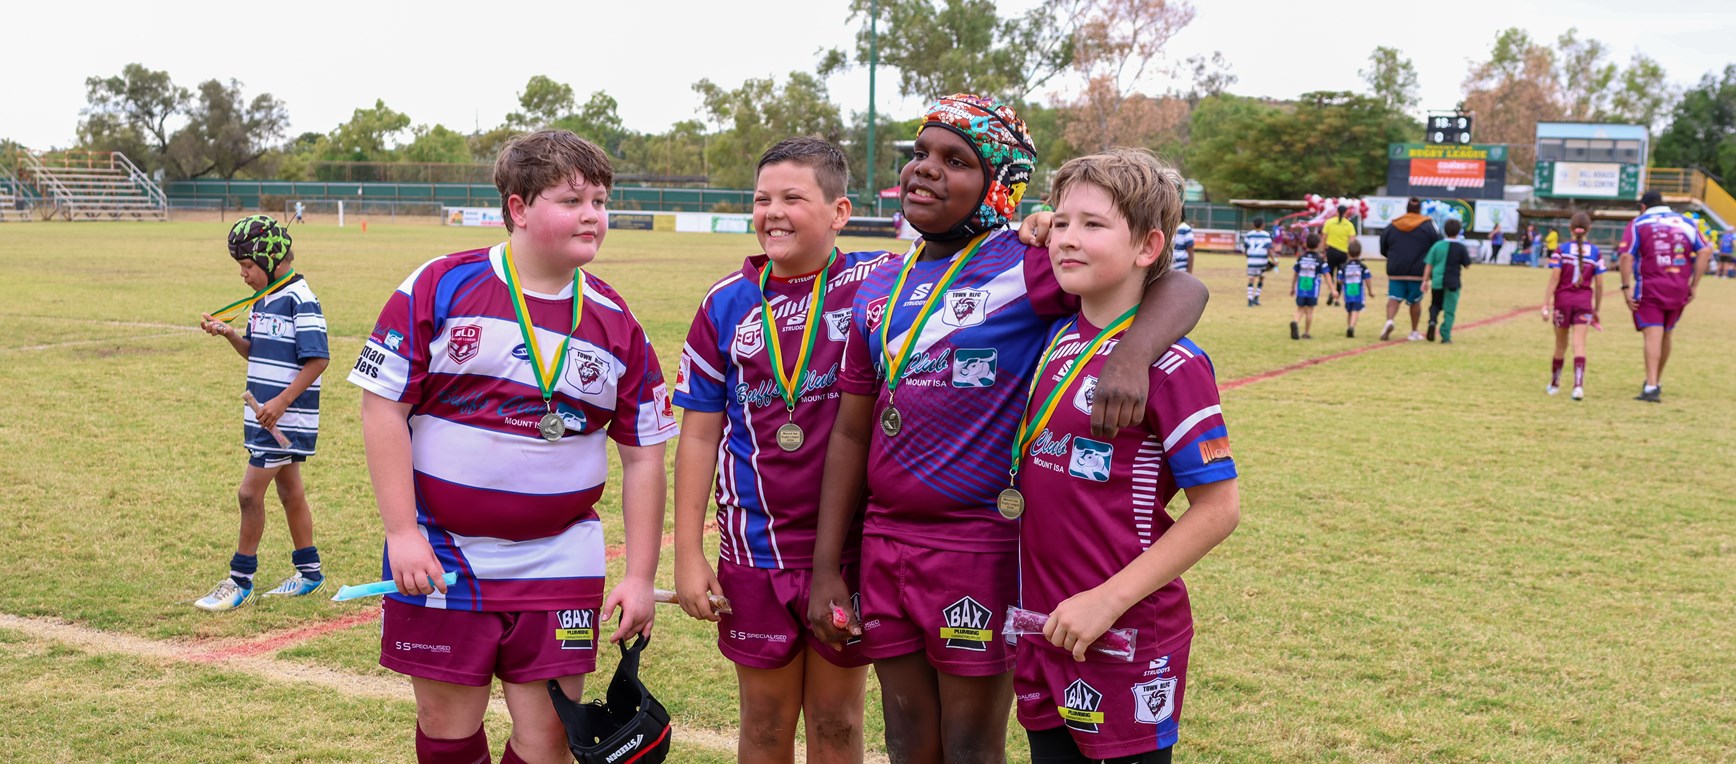 In pictures: Mount Isa Rugby League grand finals